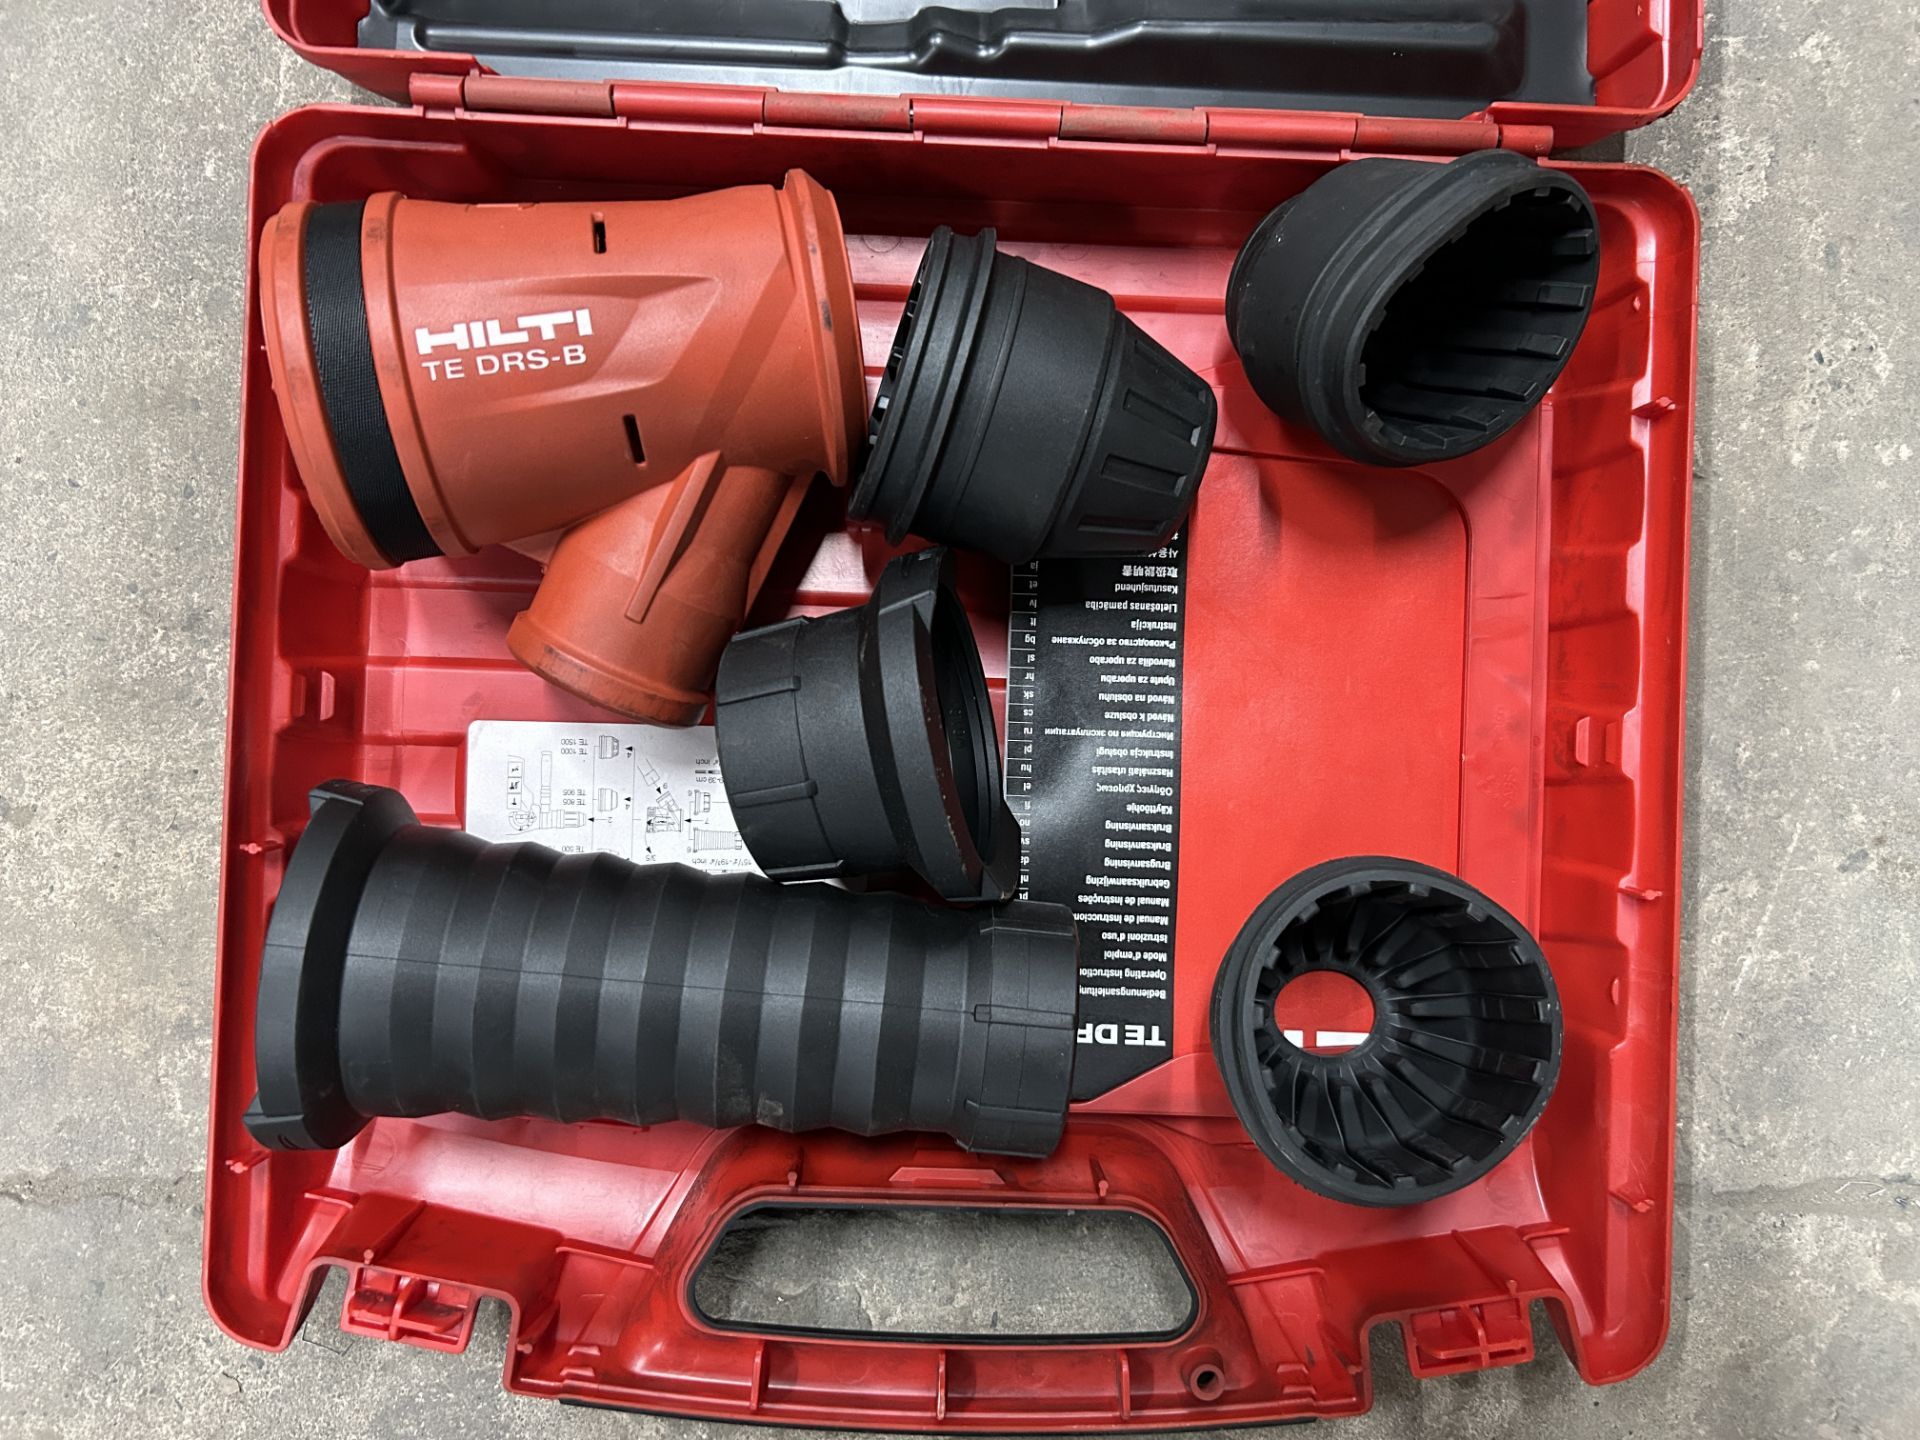 Hilti TE-DRS-B Dust removal system in Case - Image 2 of 2